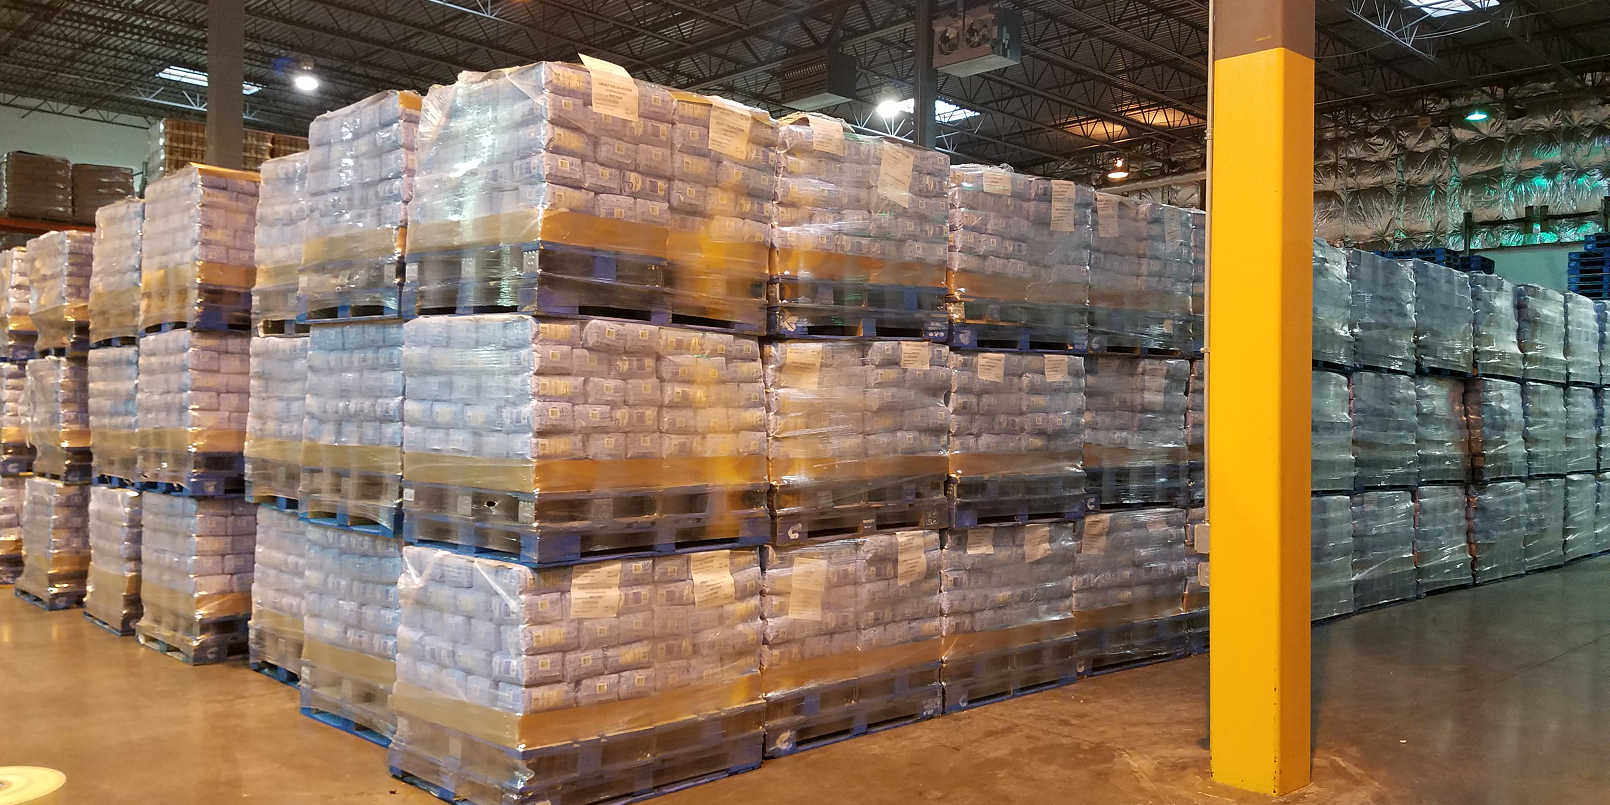 Picture of stacked and stored pallets of sugar.